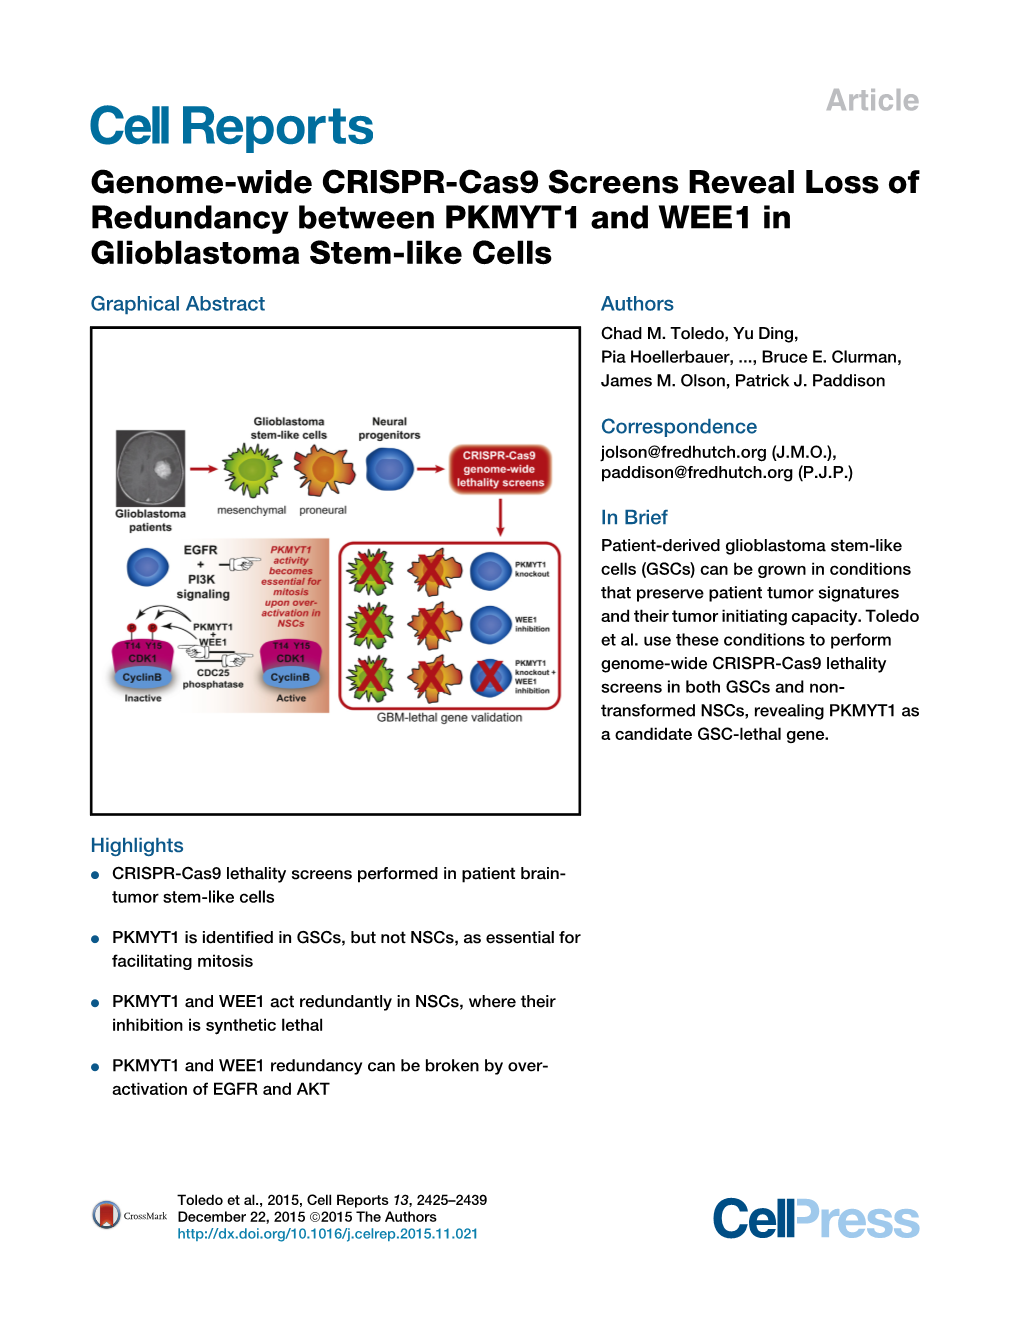 Genome-Wide CRISPR-Cas9 Screens Reveal Loss of Redundancy Between PKMYT1 and WEE1 in Glioblastoma Stem-Like Cells